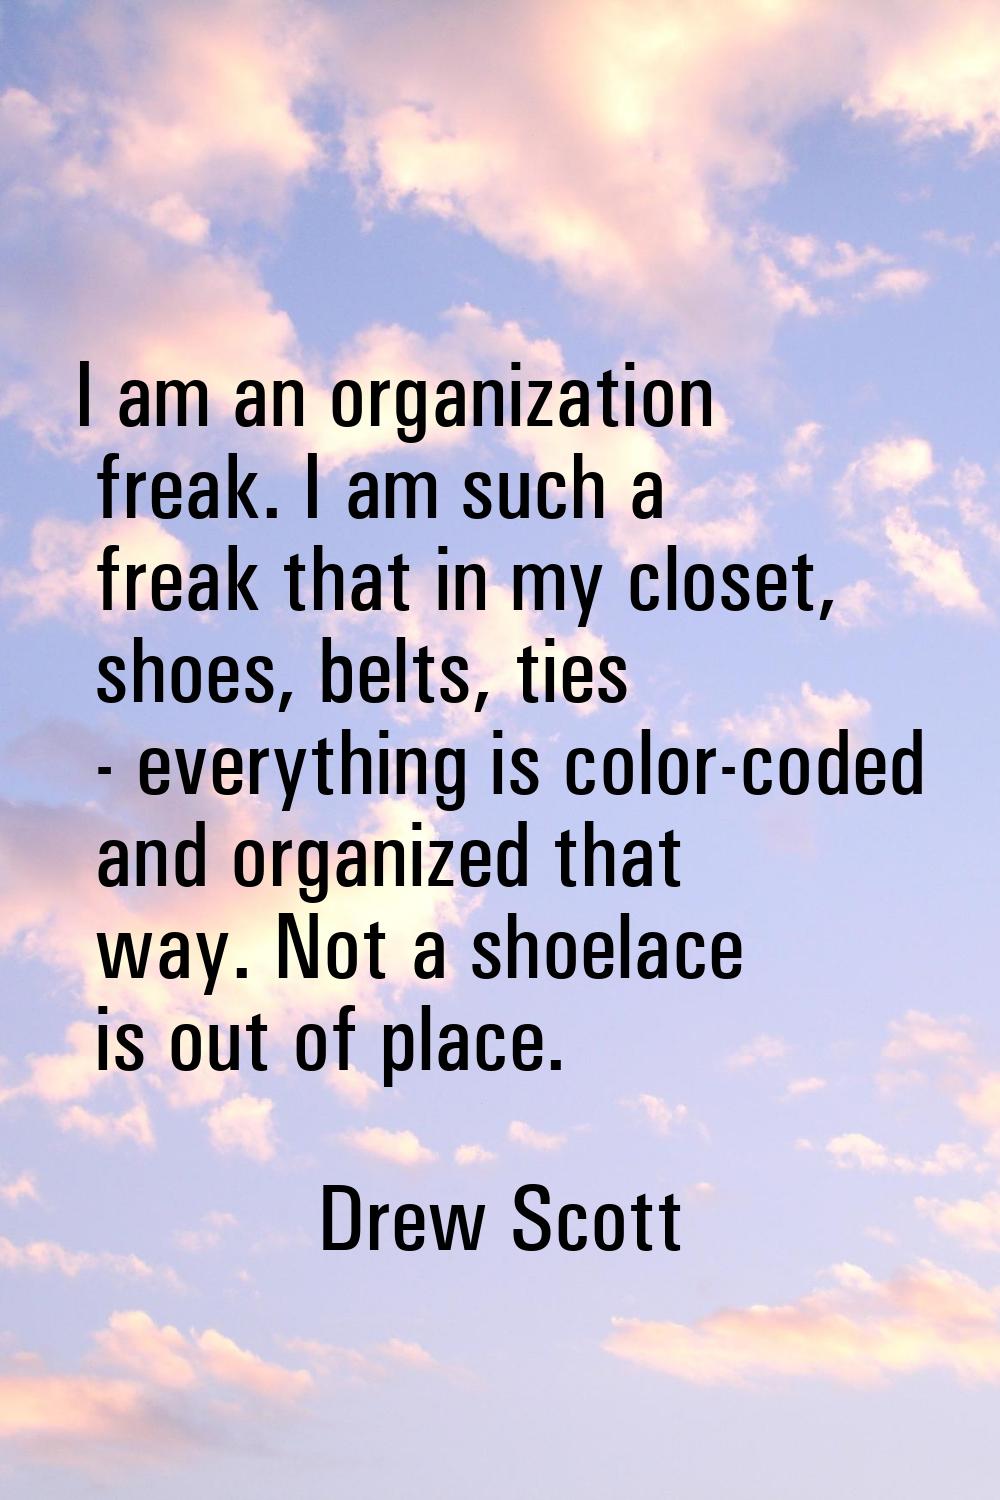 I am an organization freak. I am such a freak that in my closet, shoes, belts, ties - everything is